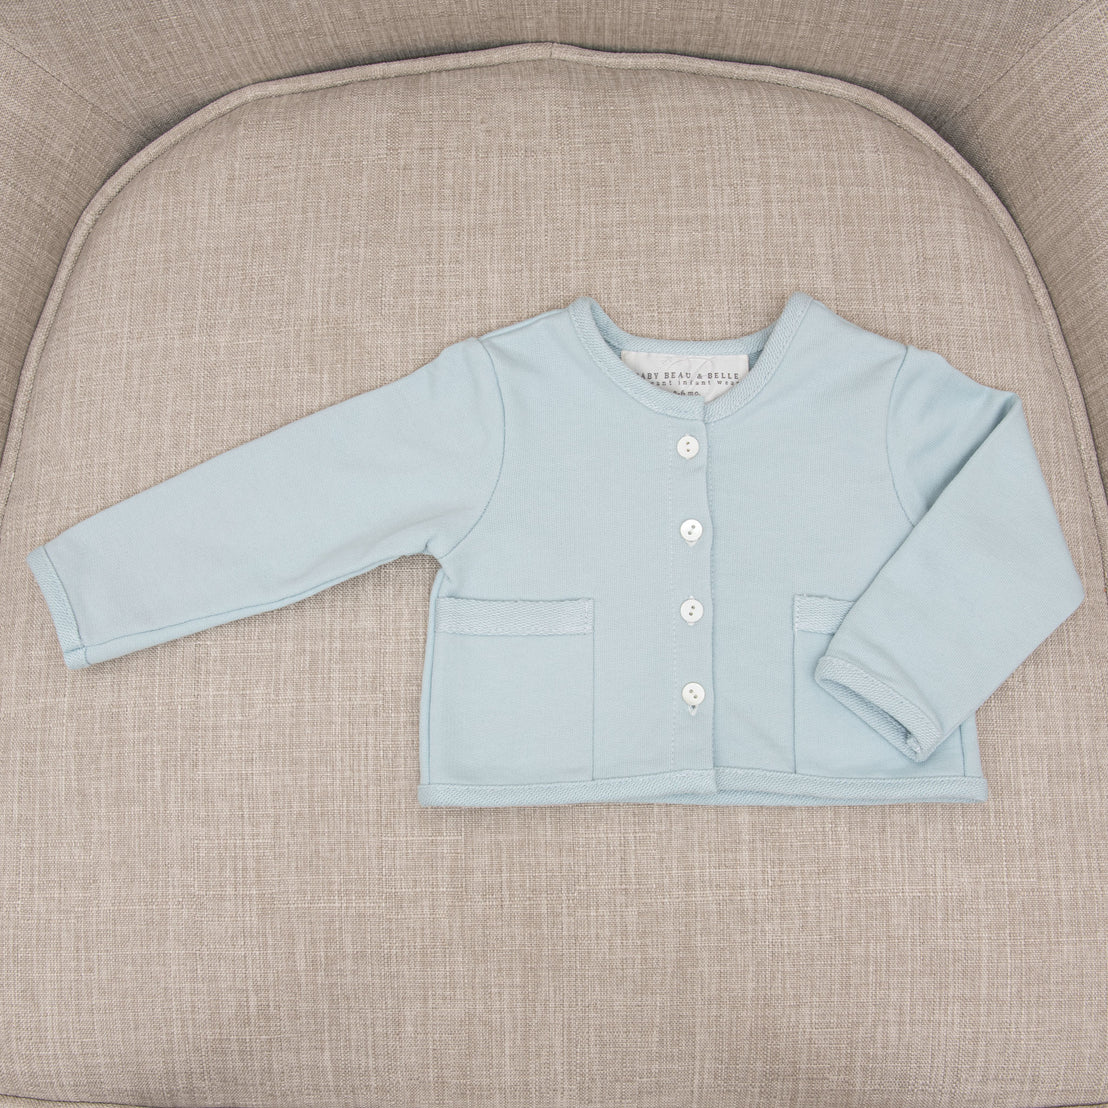 A light blue Ian French Terry Jacket with white buttons is neatly placed on a beige fabric chair.